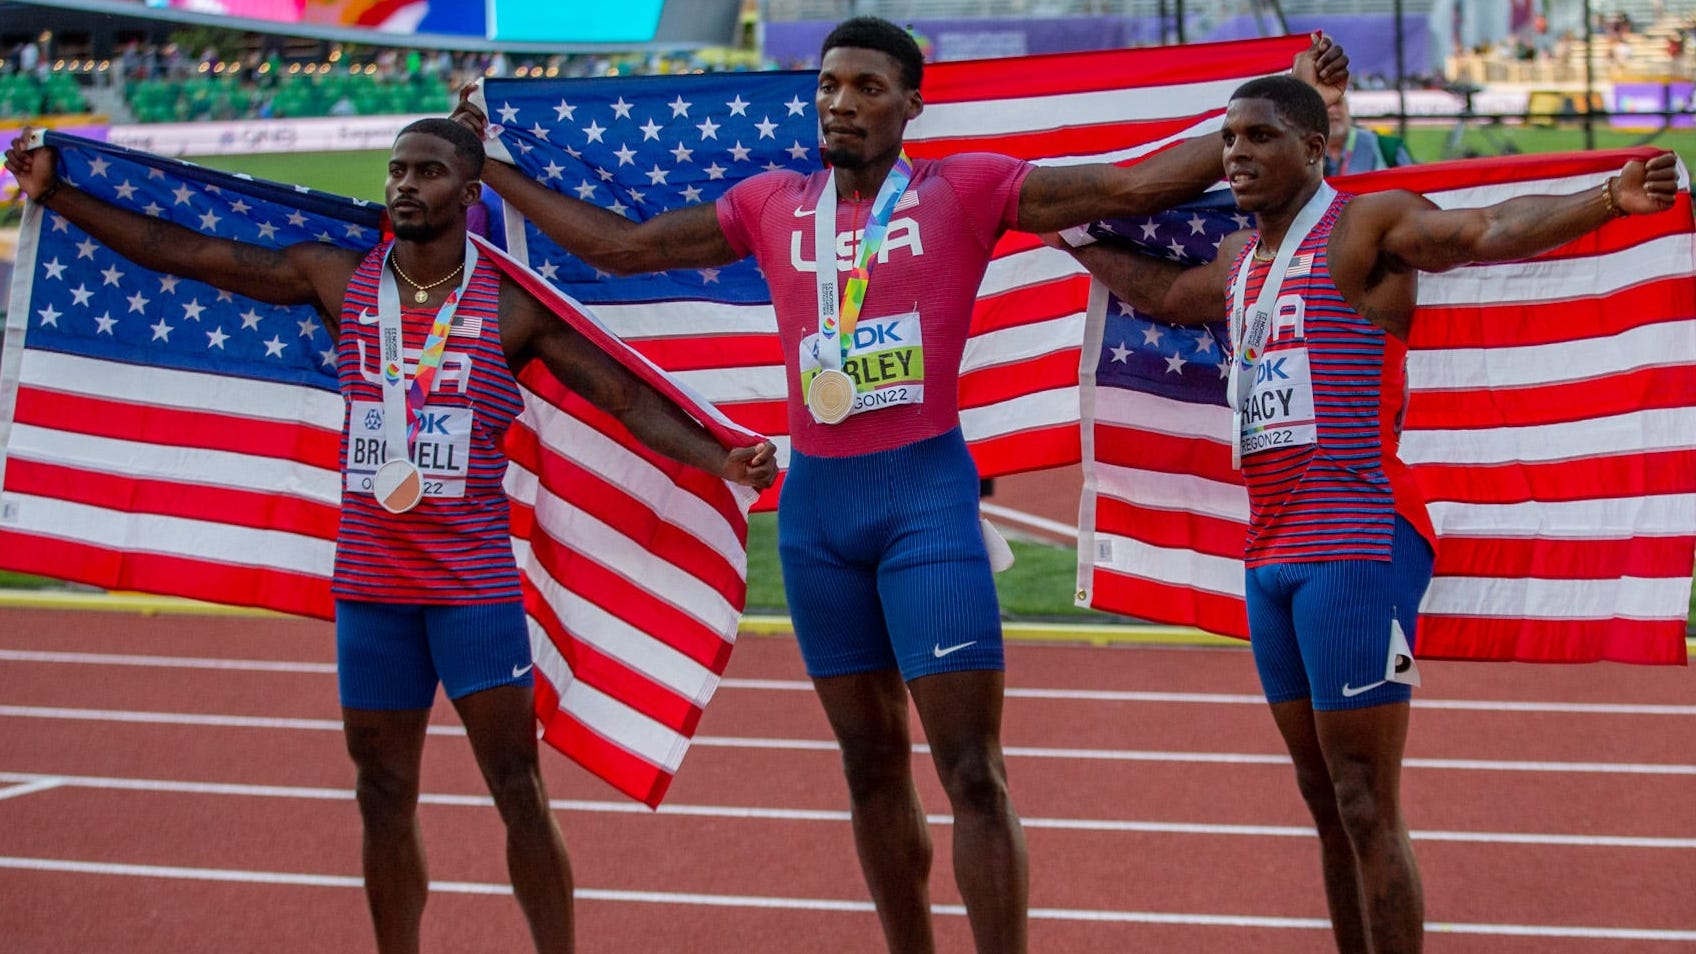 Fred Kerley wins 2022 track and field world title as U.S. men sweep